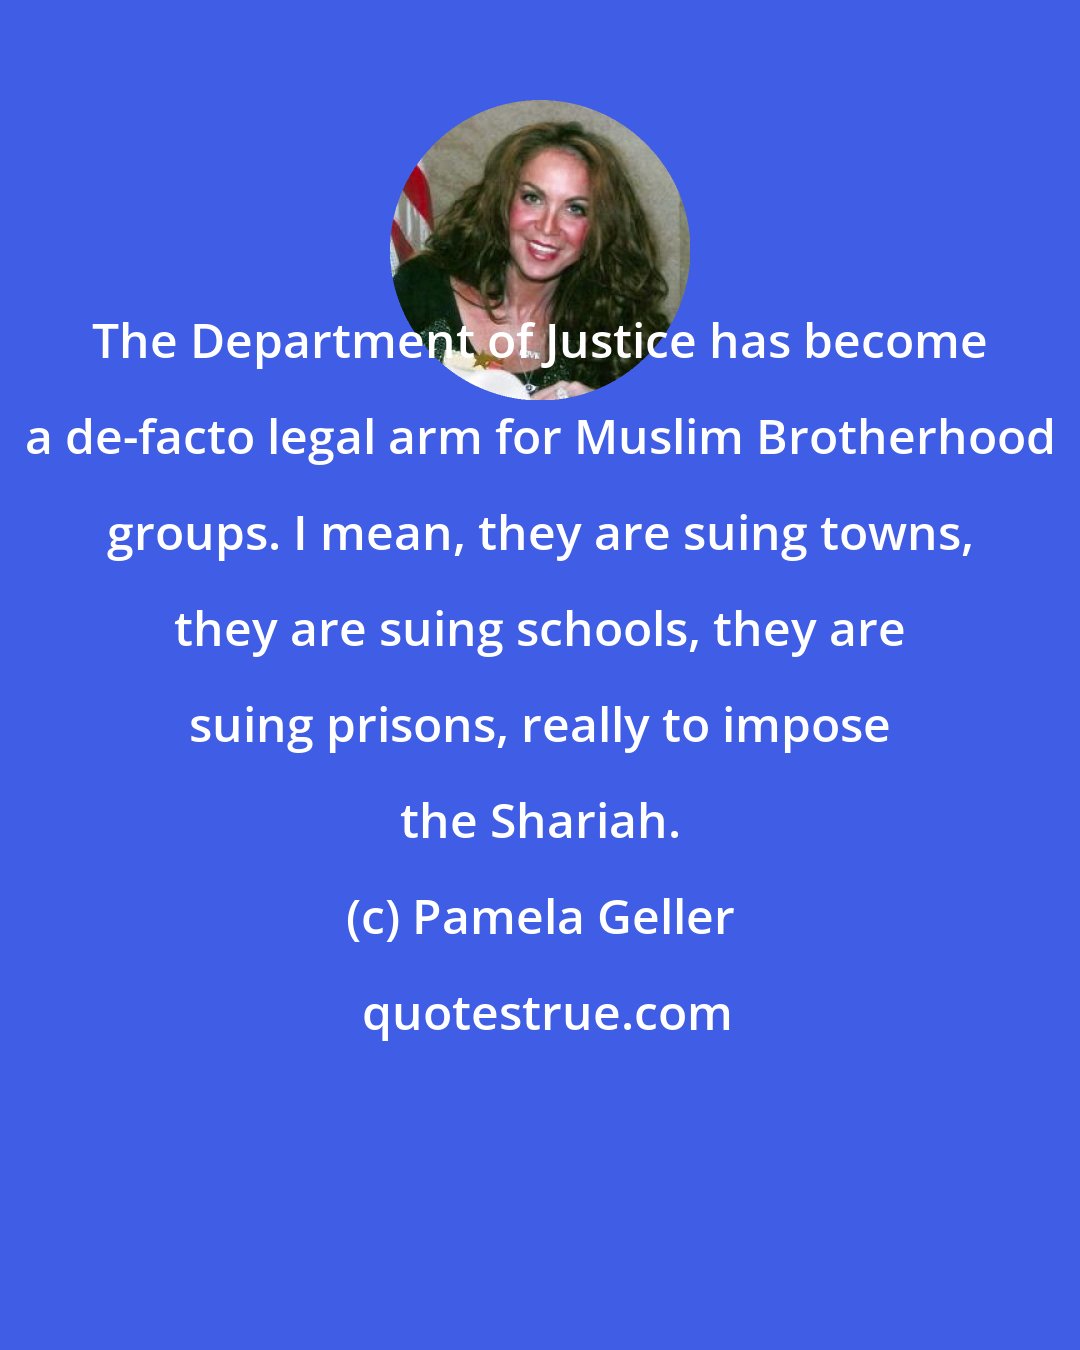 Pamela Geller: The Department of Justice has become a de-facto legal arm for Muslim Brotherhood groups. I mean, they are suing towns, they are suing schools, they are suing prisons, really to impose the Shariah.